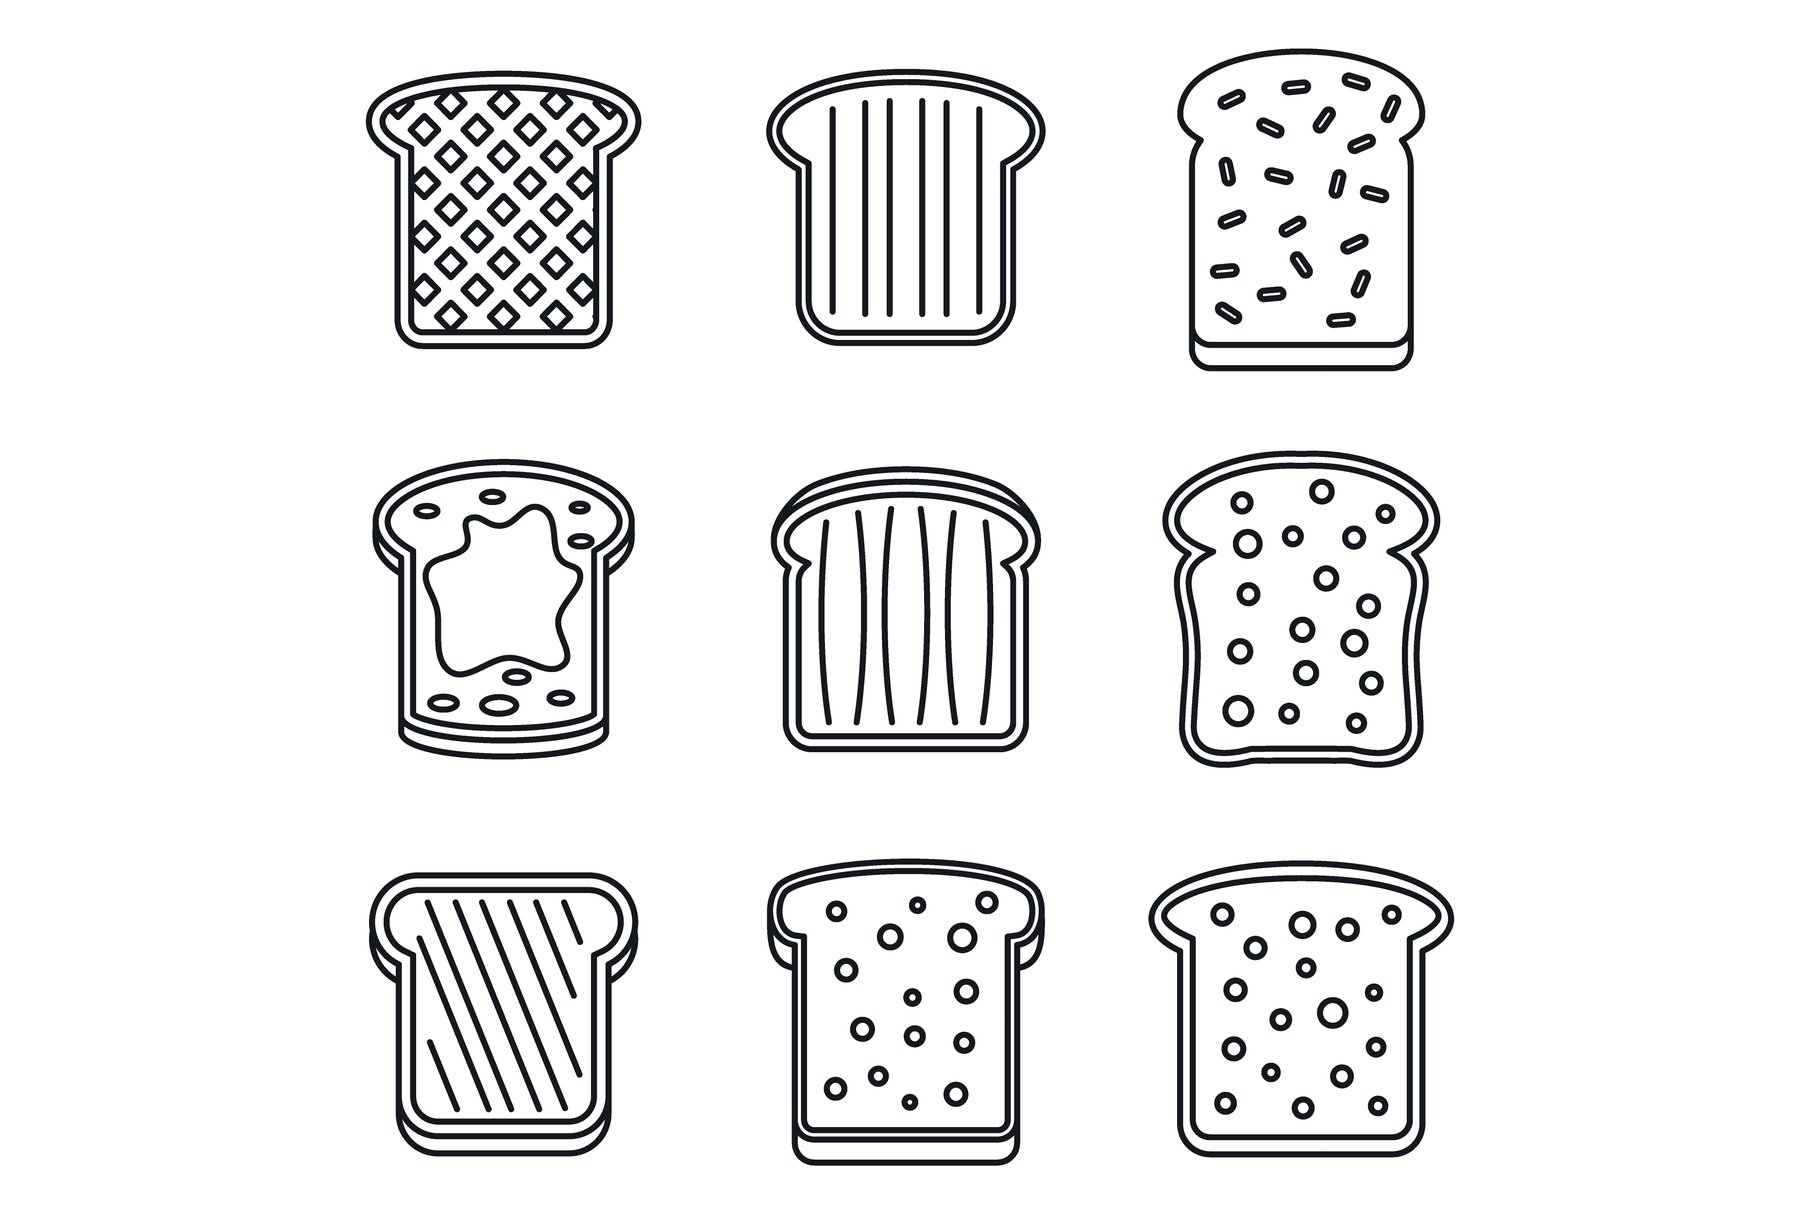 Beautiful images of toasts in black and white.